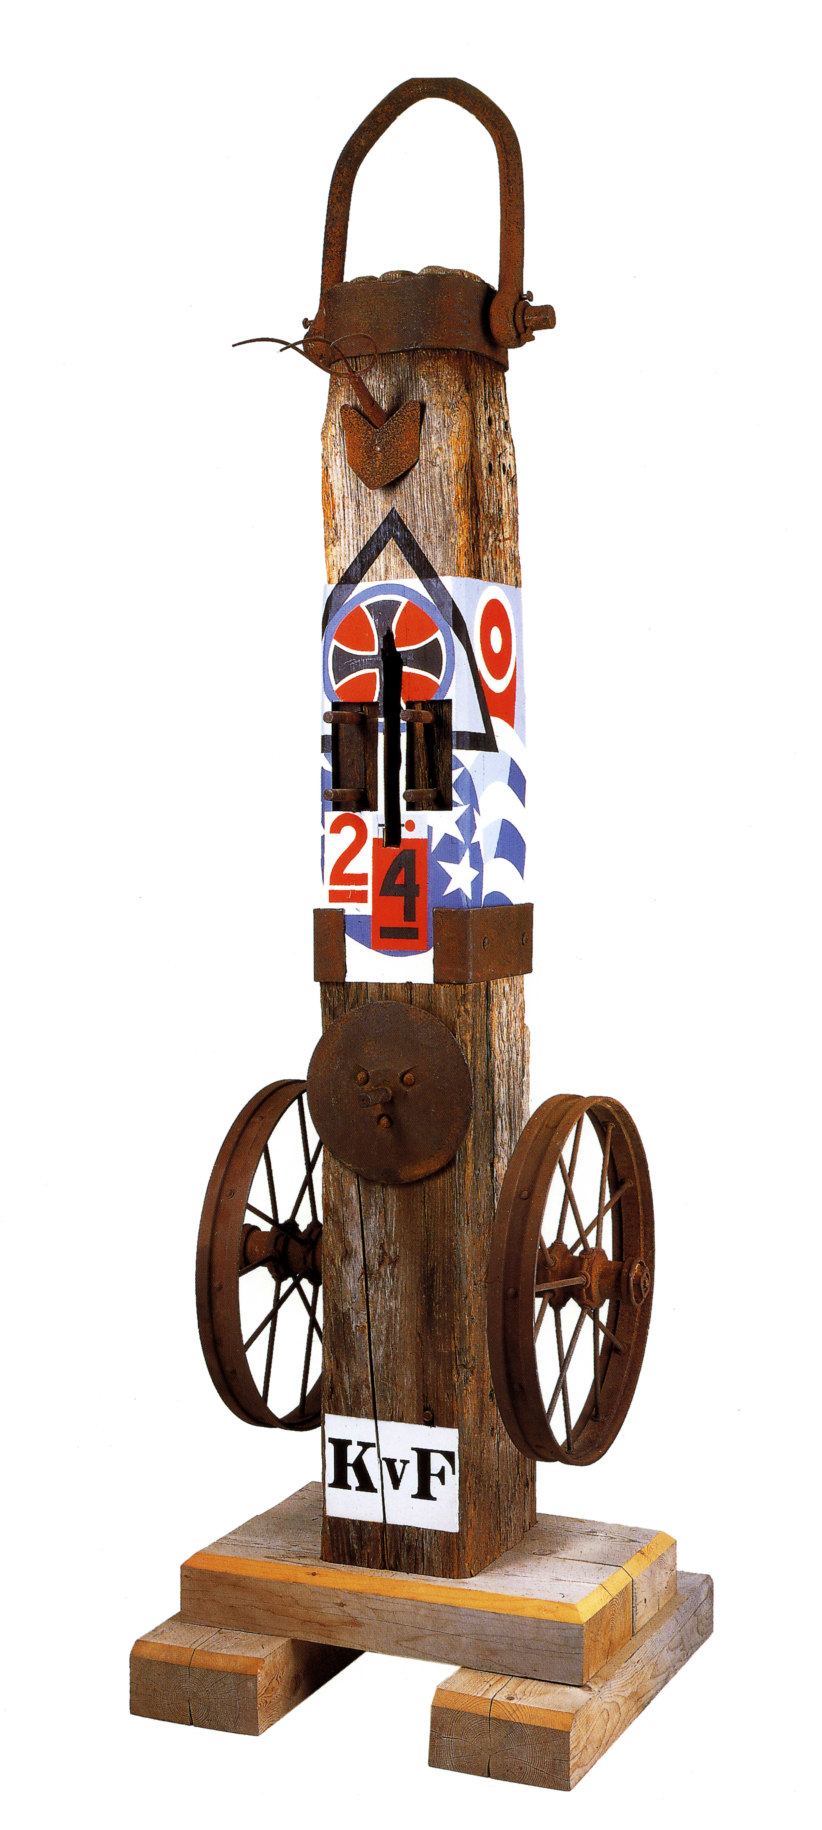 A 138 by 38 1/2 by 45 inch sculpture consisting of a wooden beam on a wooden base. The work's title, &quot;KvF&quot; appears in stenciled letters against a white ground. An iron wheel is affixed to the right and left sides of the sculpture. On the front of the sculpture, level with the top of the wheels, is an iron disk. Above this a section of the sculpture has been painted with red, blue, white, and black designs that include a cross, stars, and the numbers 2 and 4. At the top of the sculpture is an iron cap with a handle.